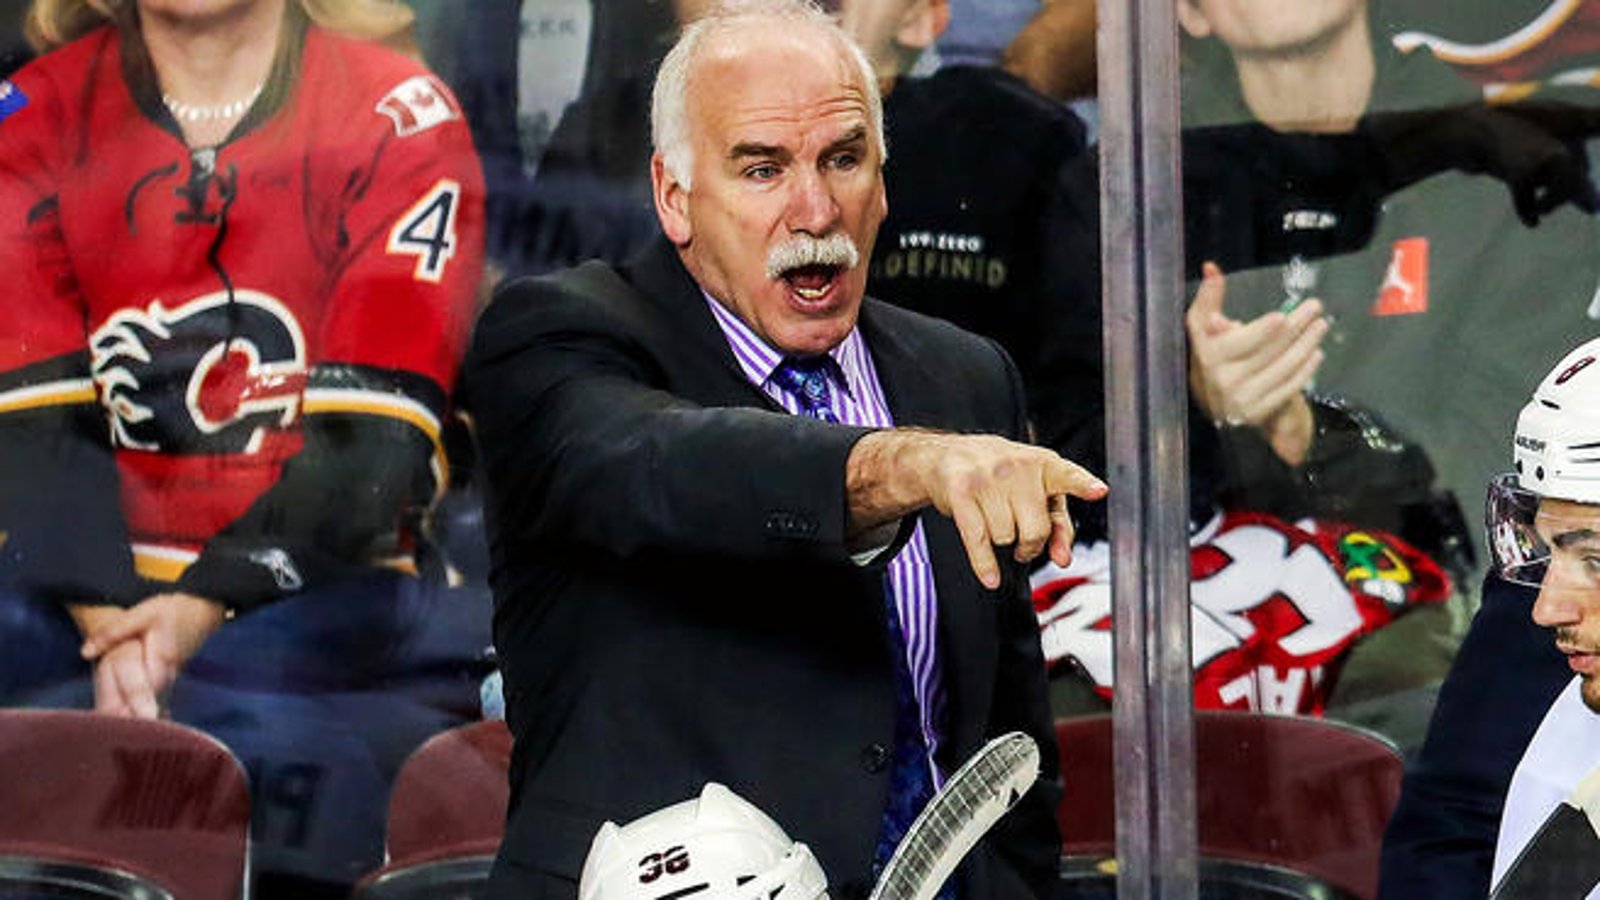 One Western club going all-in to sign Quenneville?